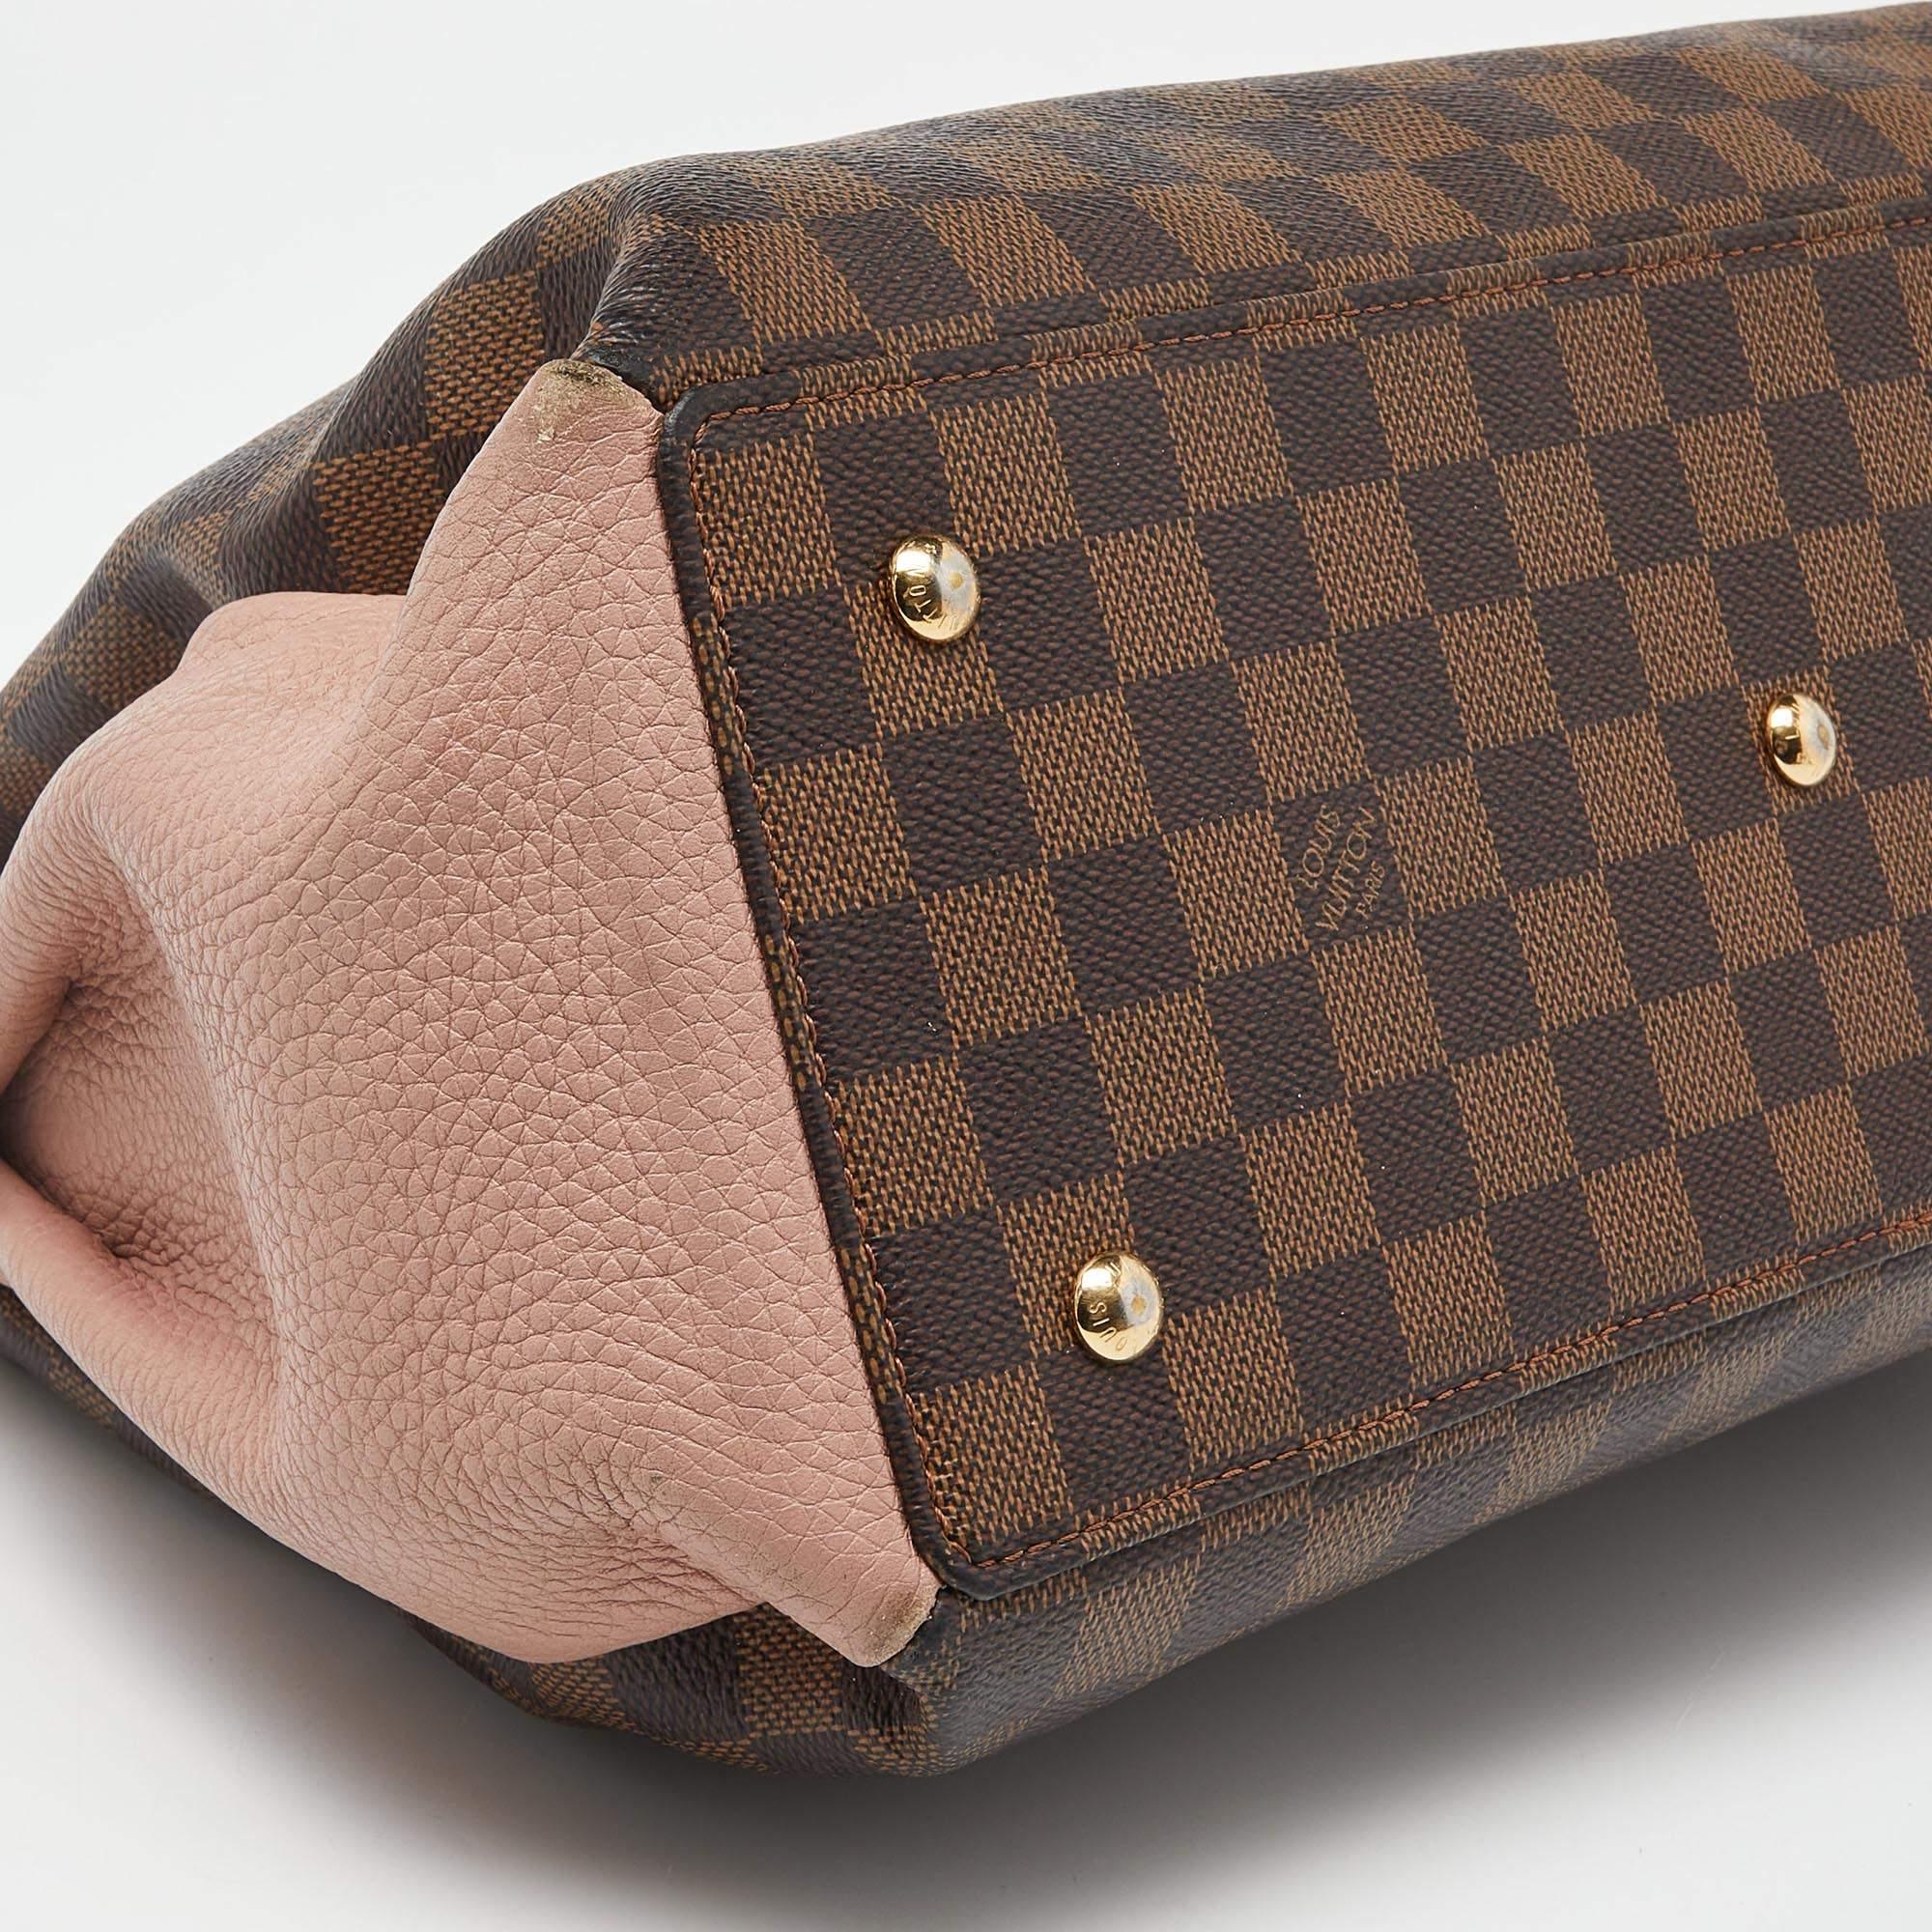 Louis Vuitton Damier Ebene Canvas and Leather Normandy Bag For Sale 11